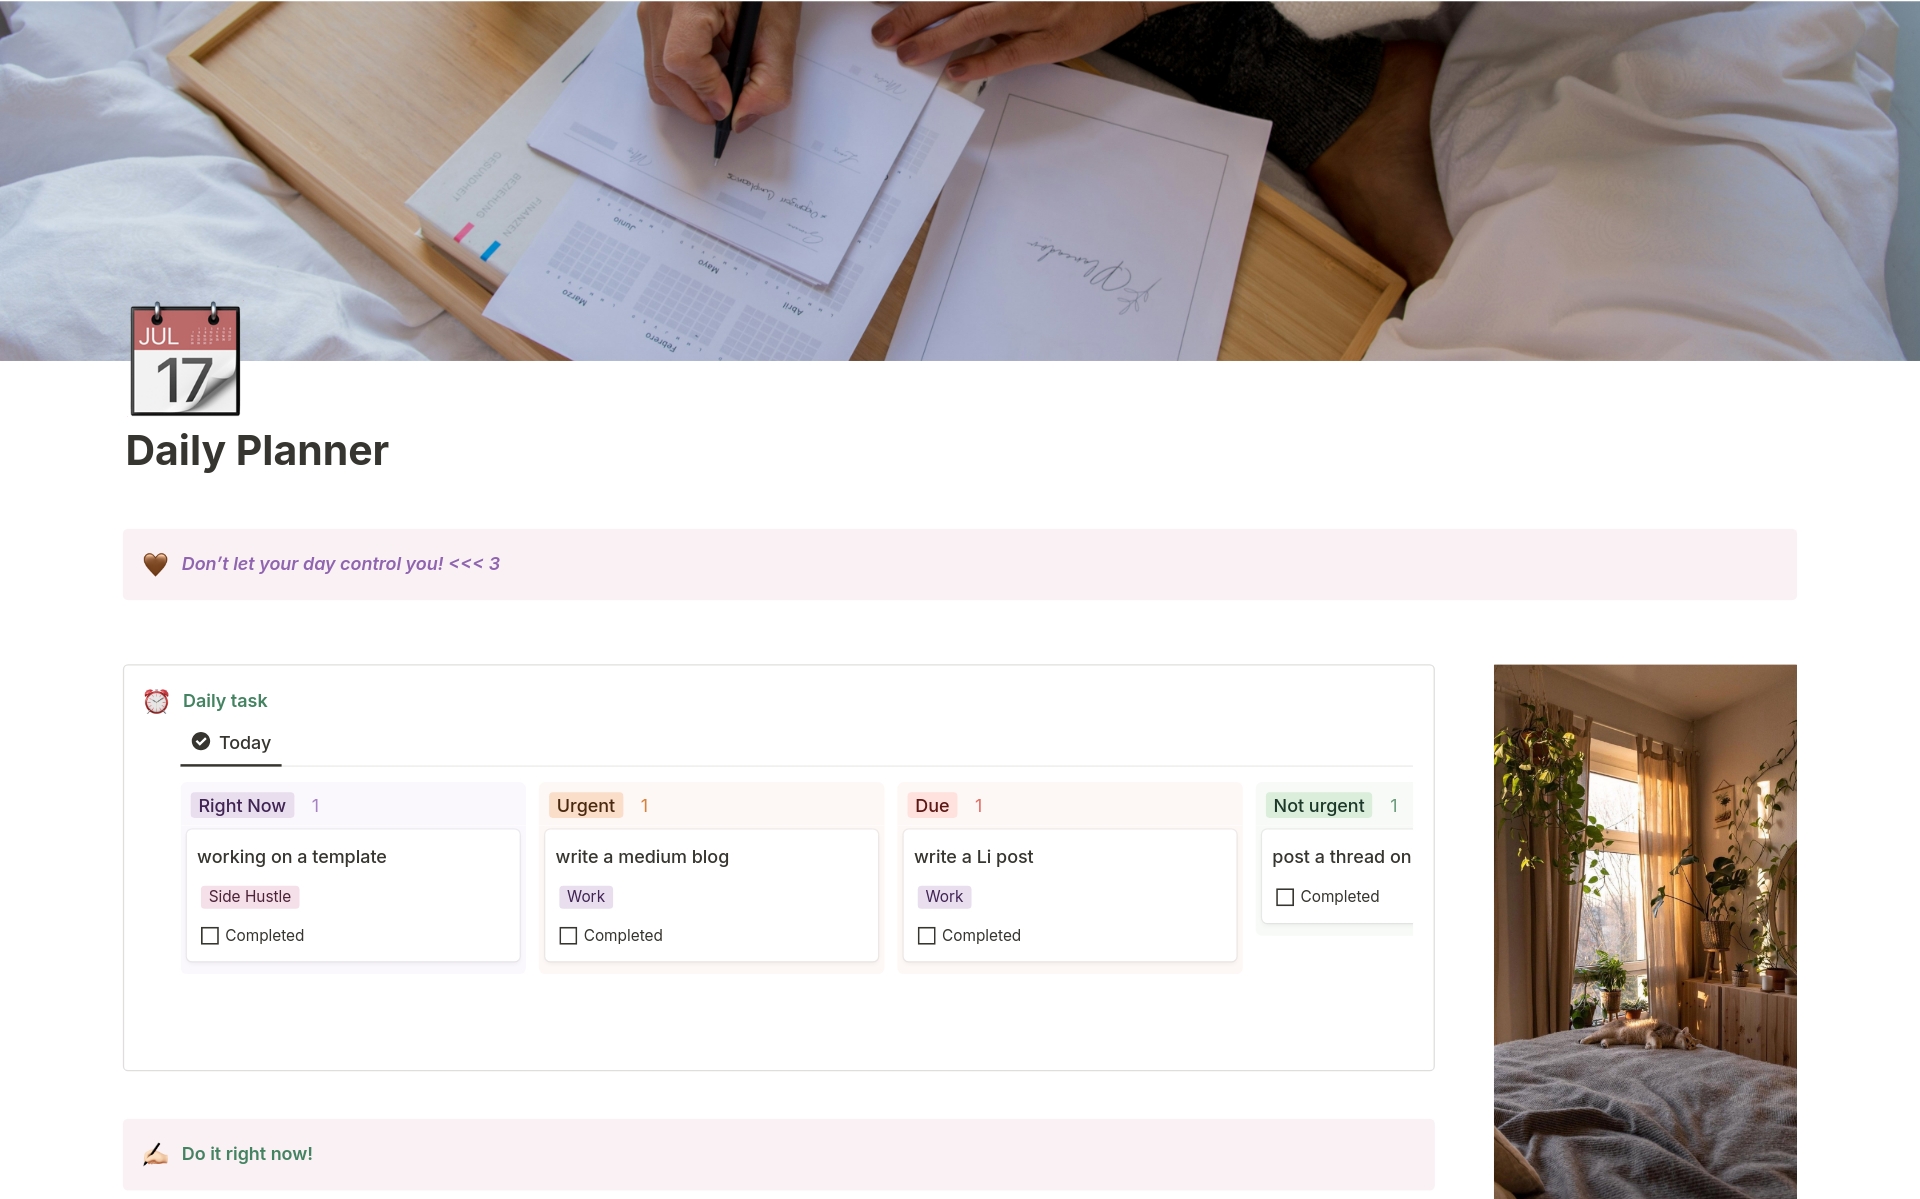 Plan your daily to-do, notes, and tasks in one place.